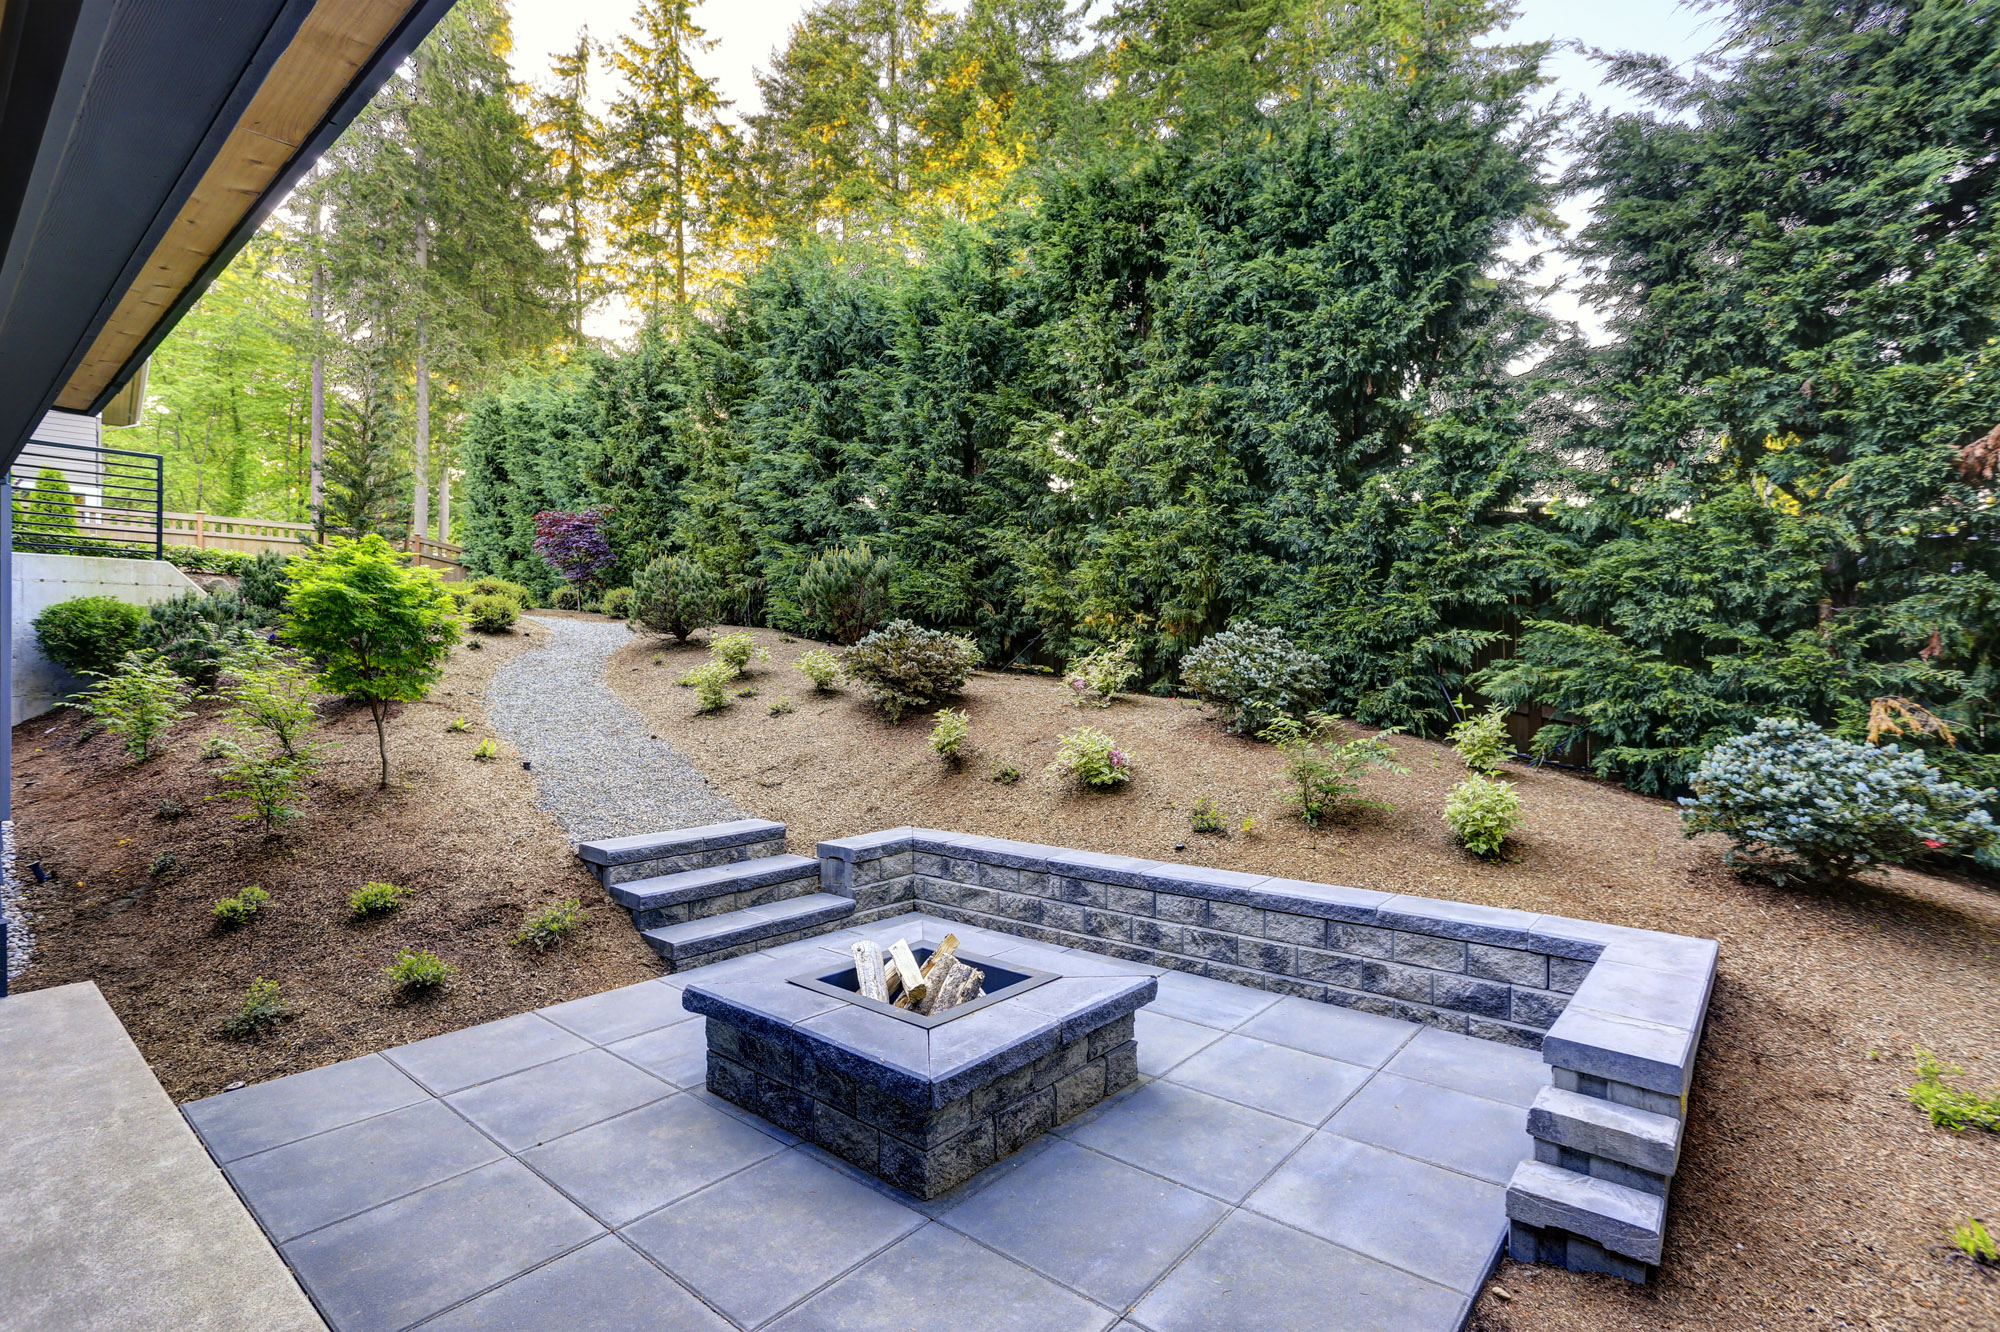 New modern home features a backyard with rectangular concrete fire pit framed by slate pavers and overlooking the lush garden. Northwest, USA